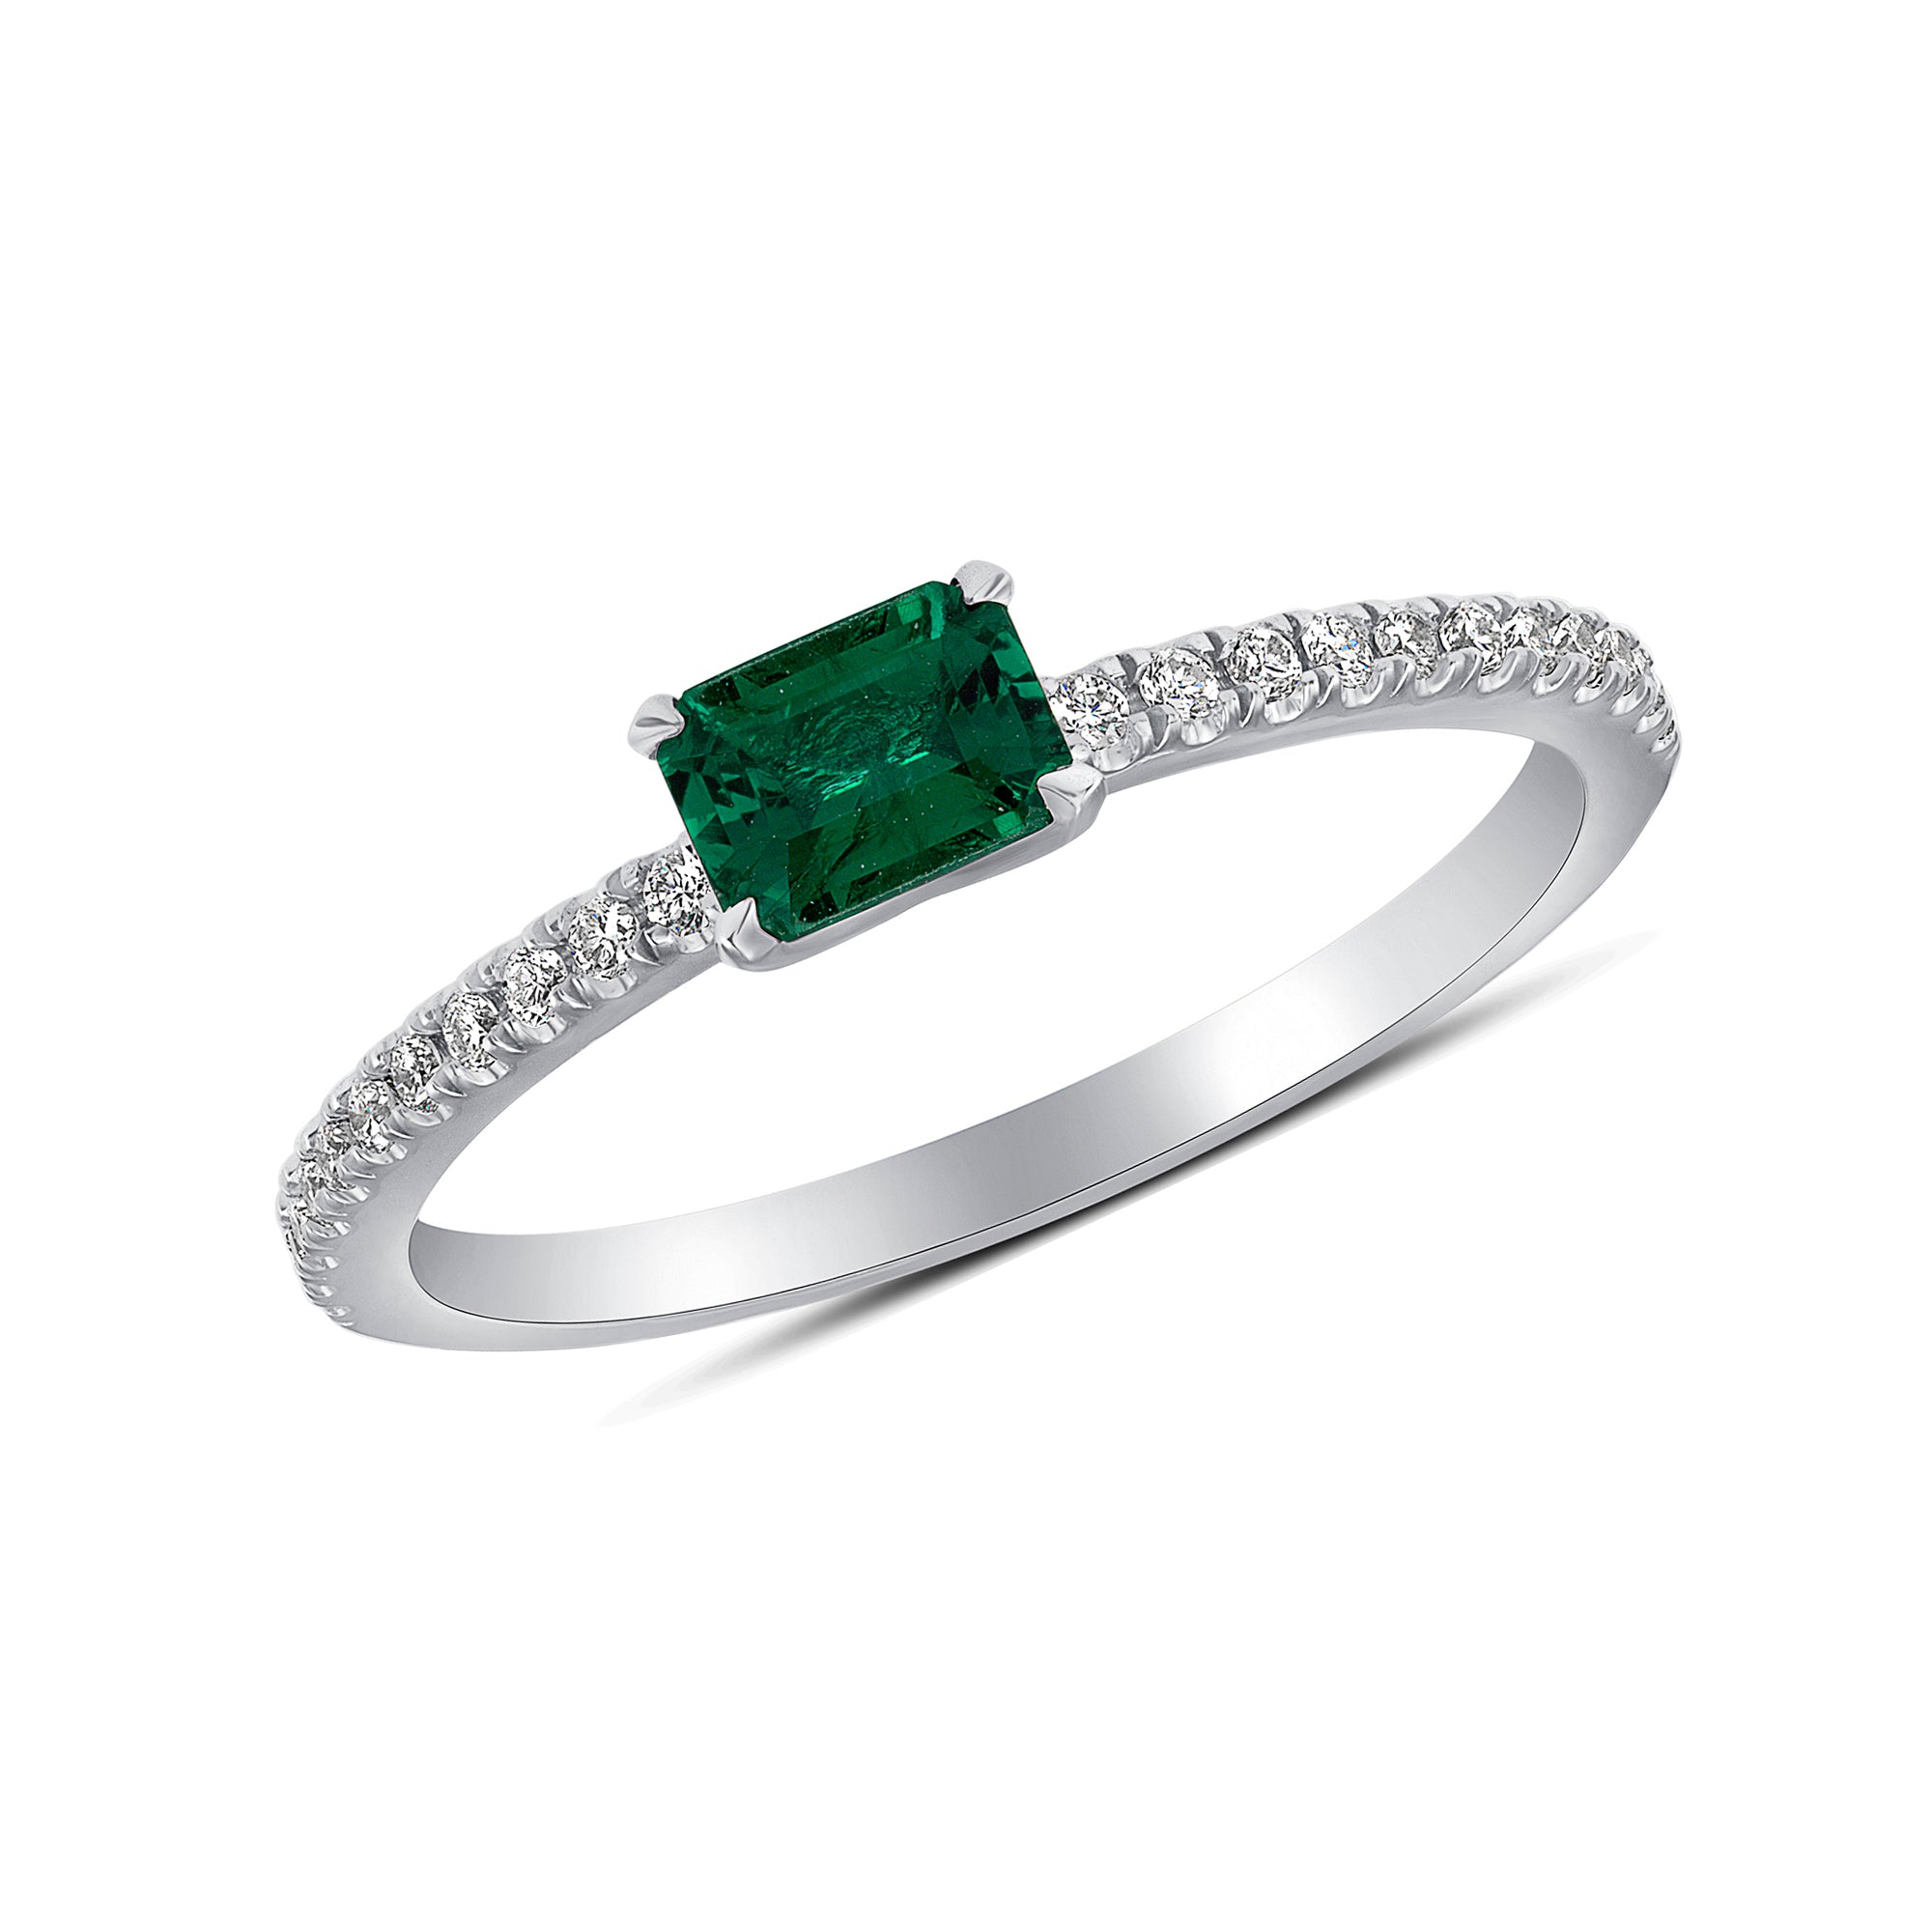 East-West Emerald Ring - 0.74ct TW